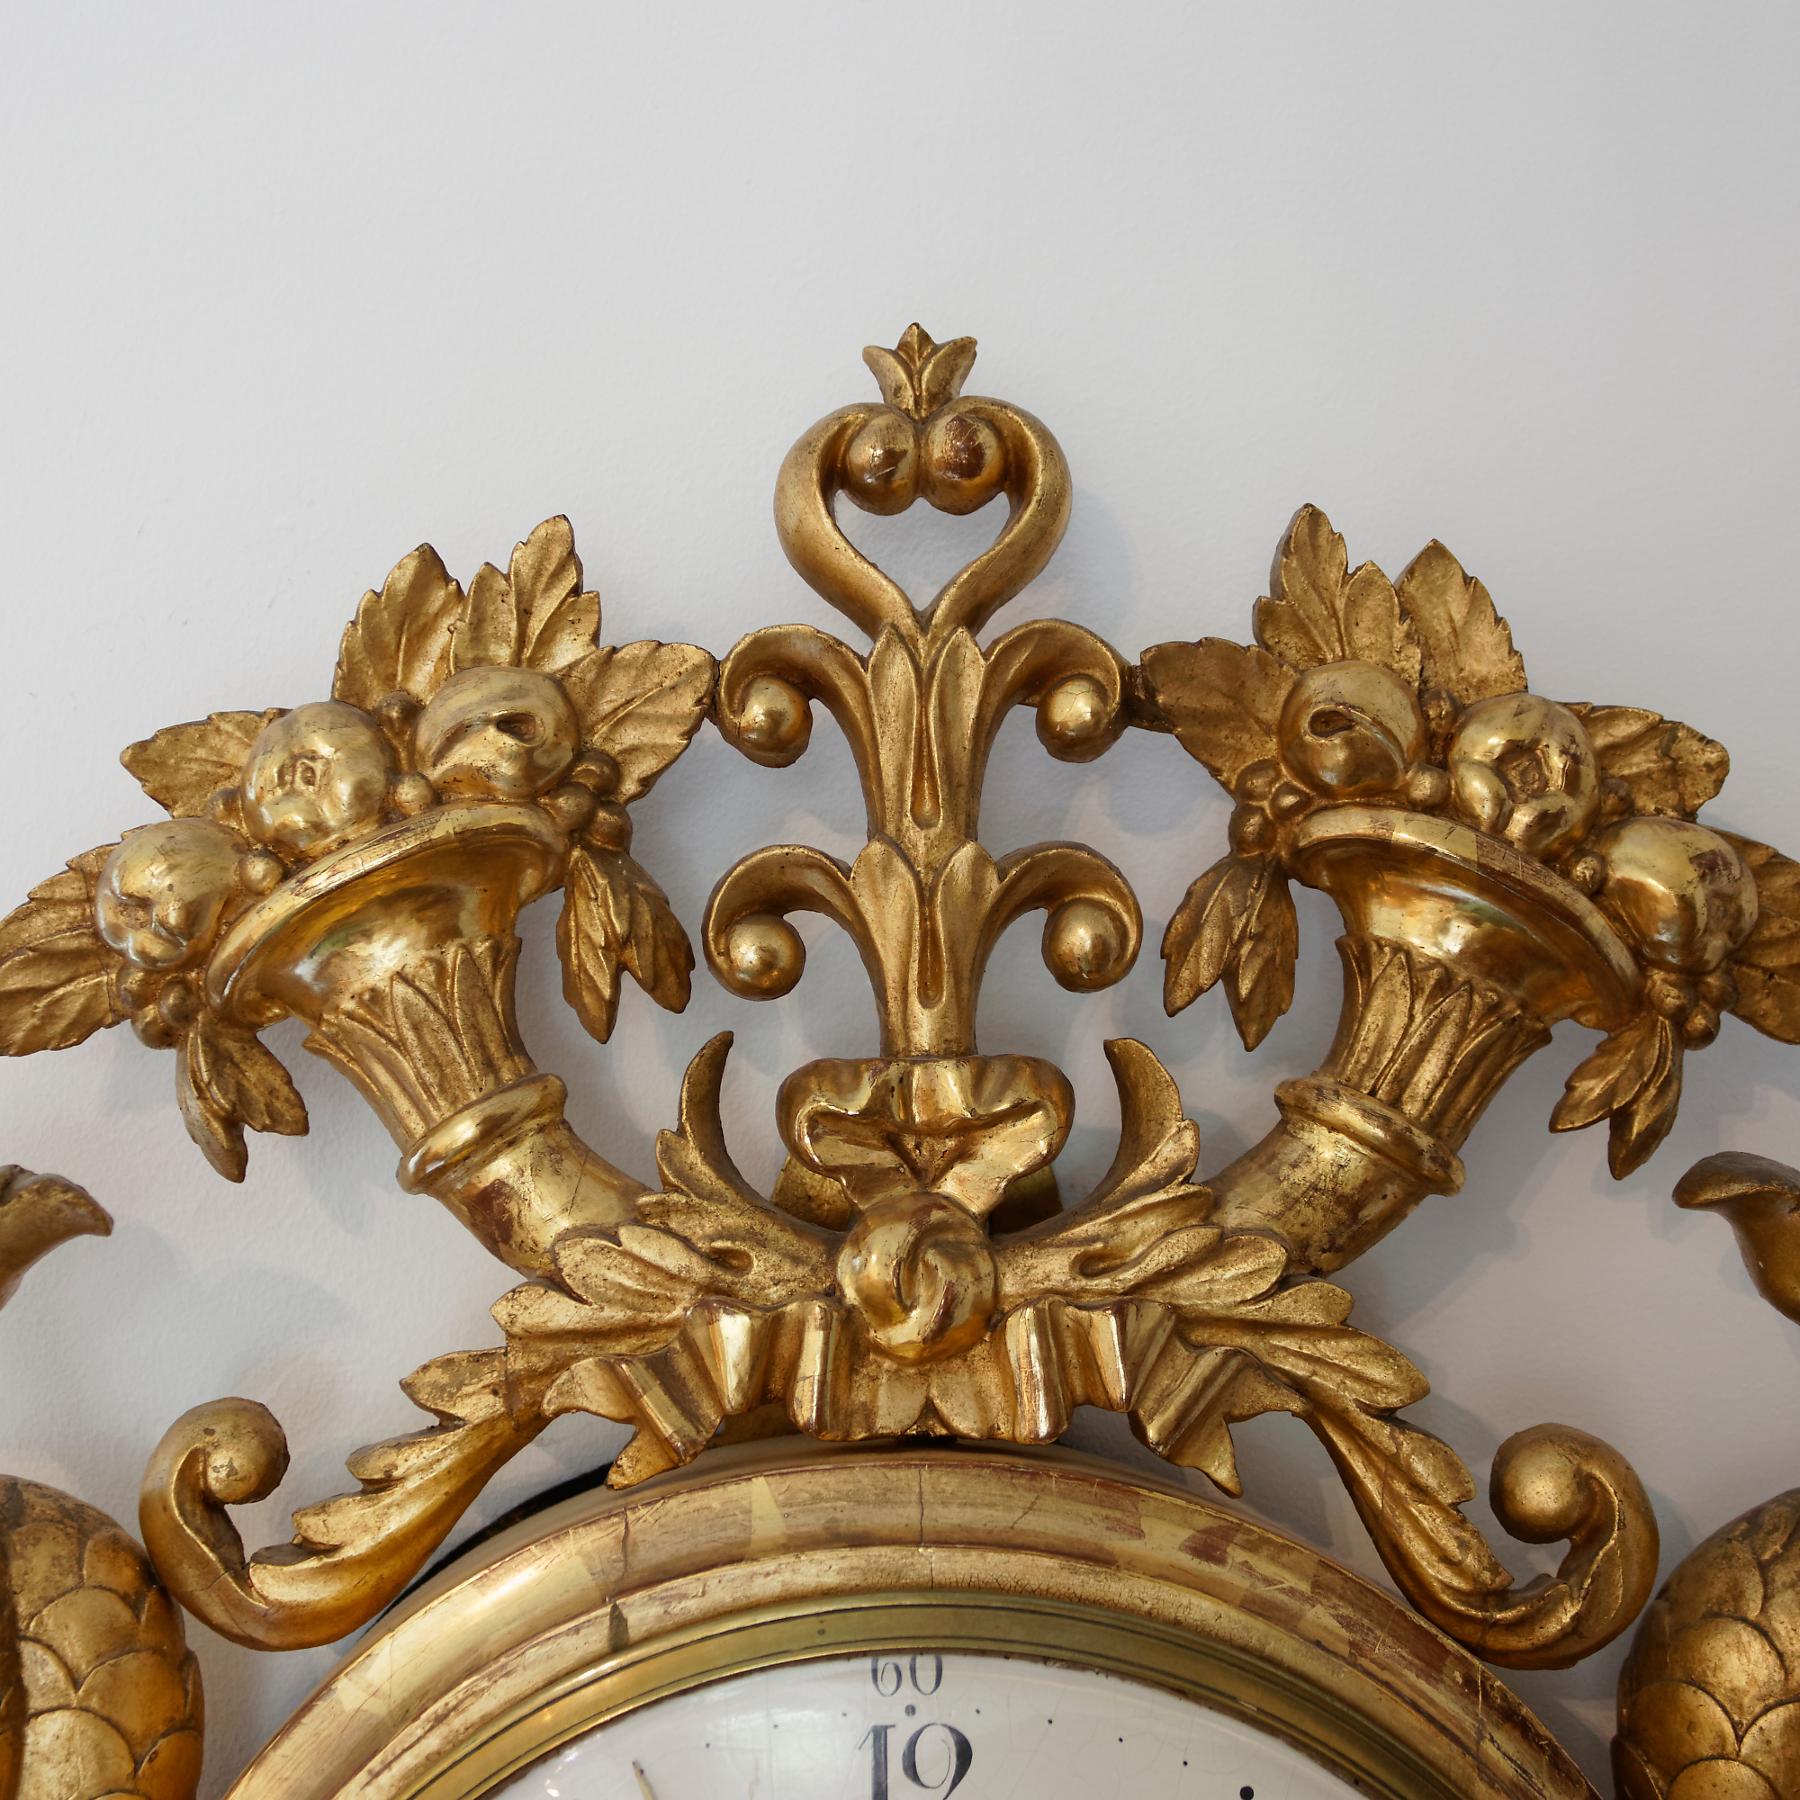 Empire 19th Century Swedish Gilded Wall Clock with Dolphins, Signed Ericsson Stockholm For Sale